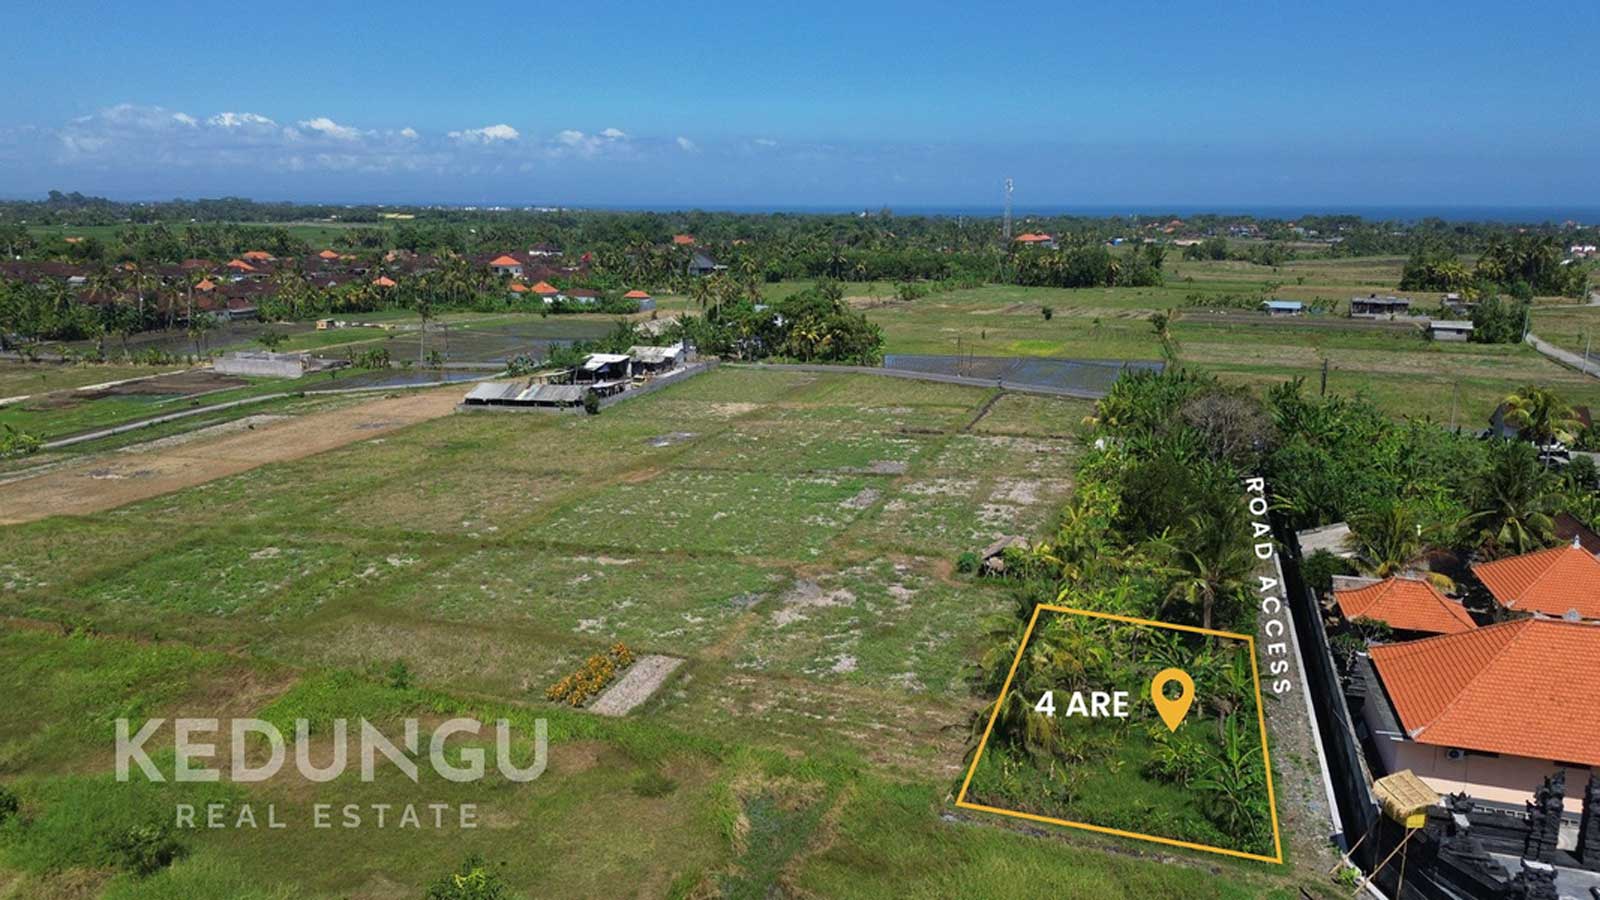 4 are freehold land on the side road in kedungu KRE 01